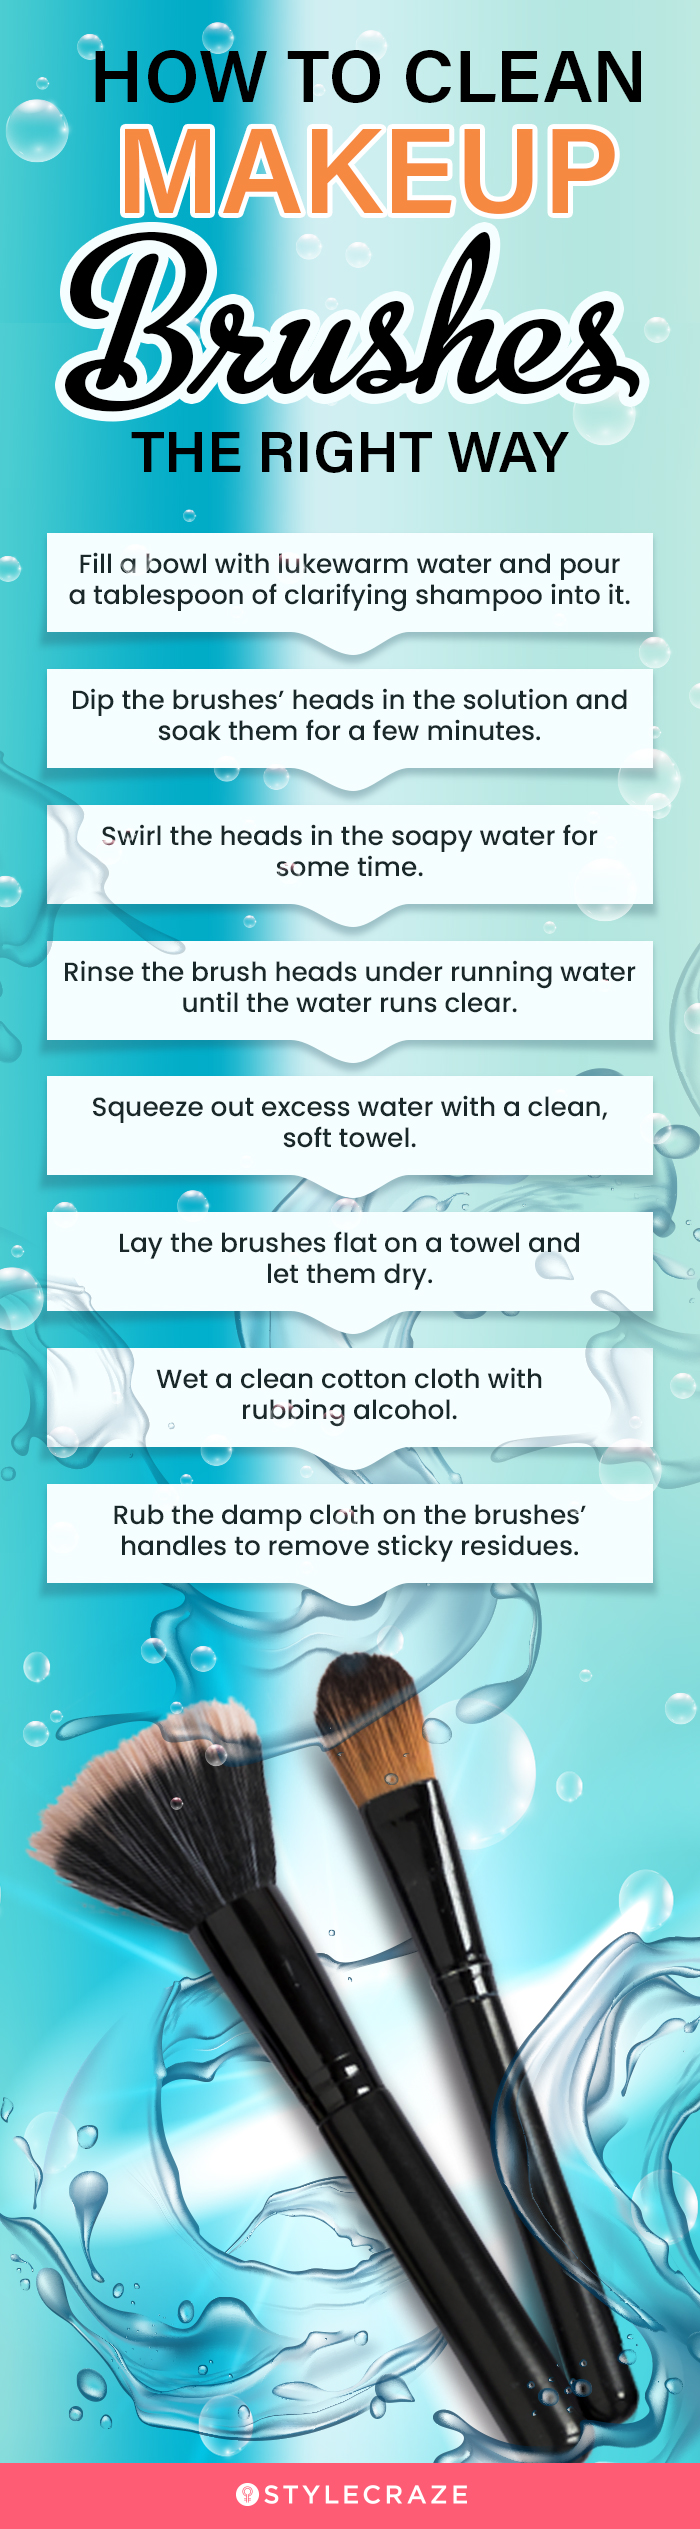 How To Clean Makeup Brushes The Right Way (infographic)